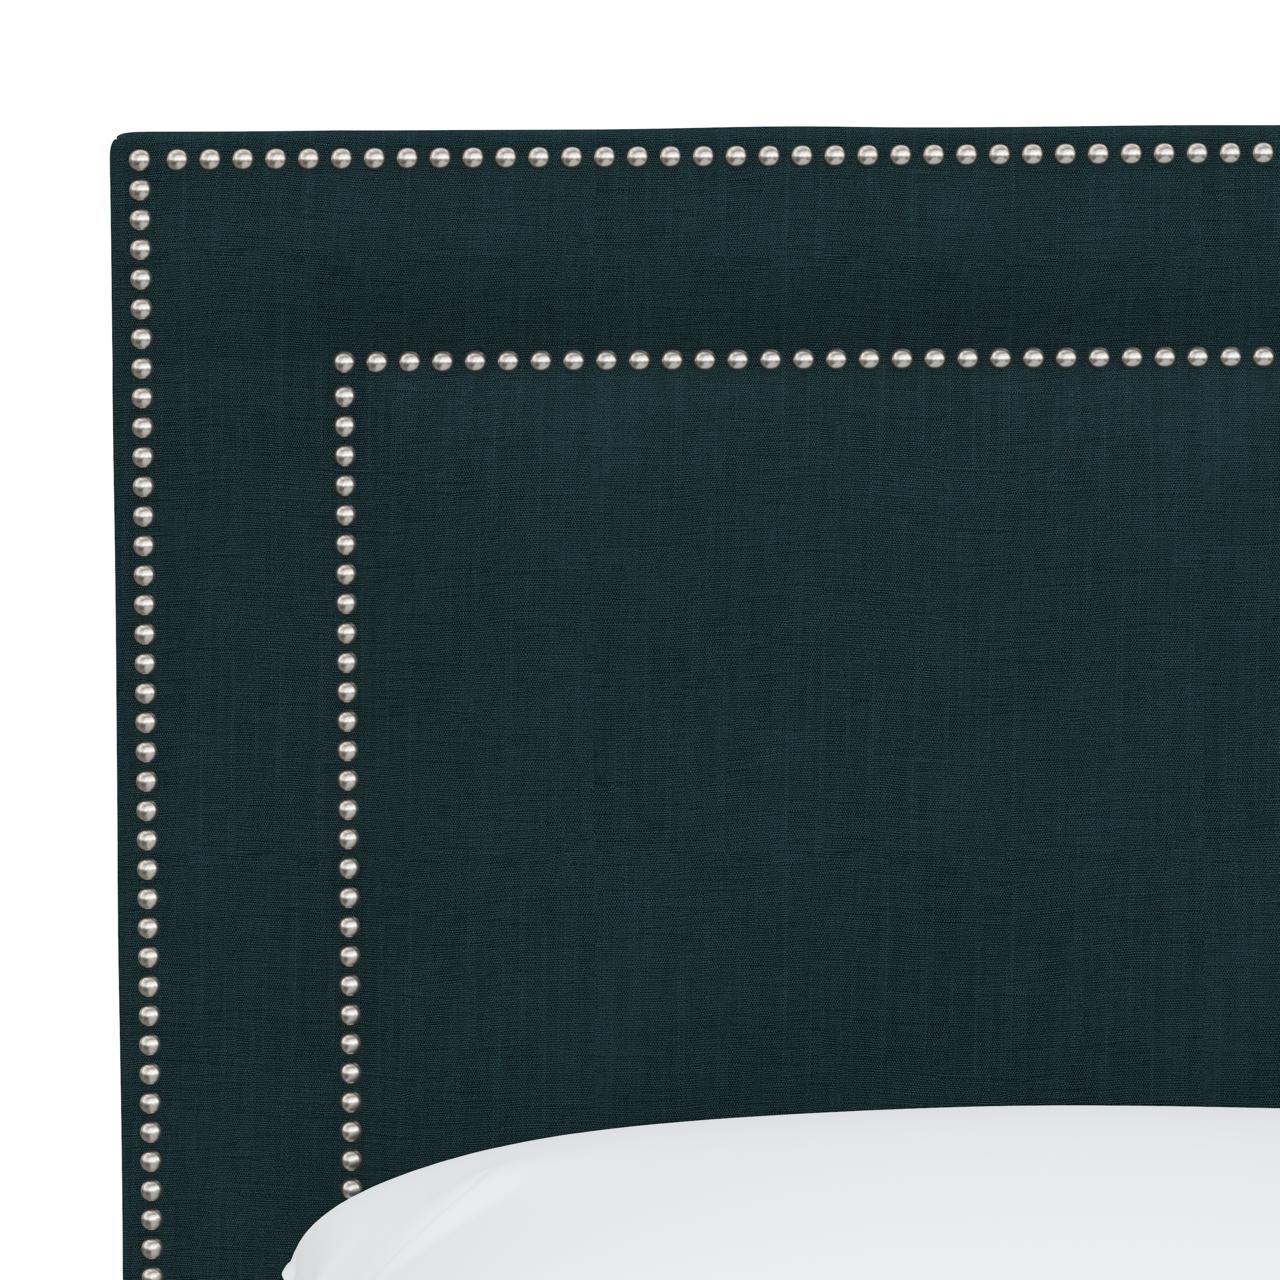 Williams Bed, California King, Linen Conifer Green, Pewter Nailheads - Image 3